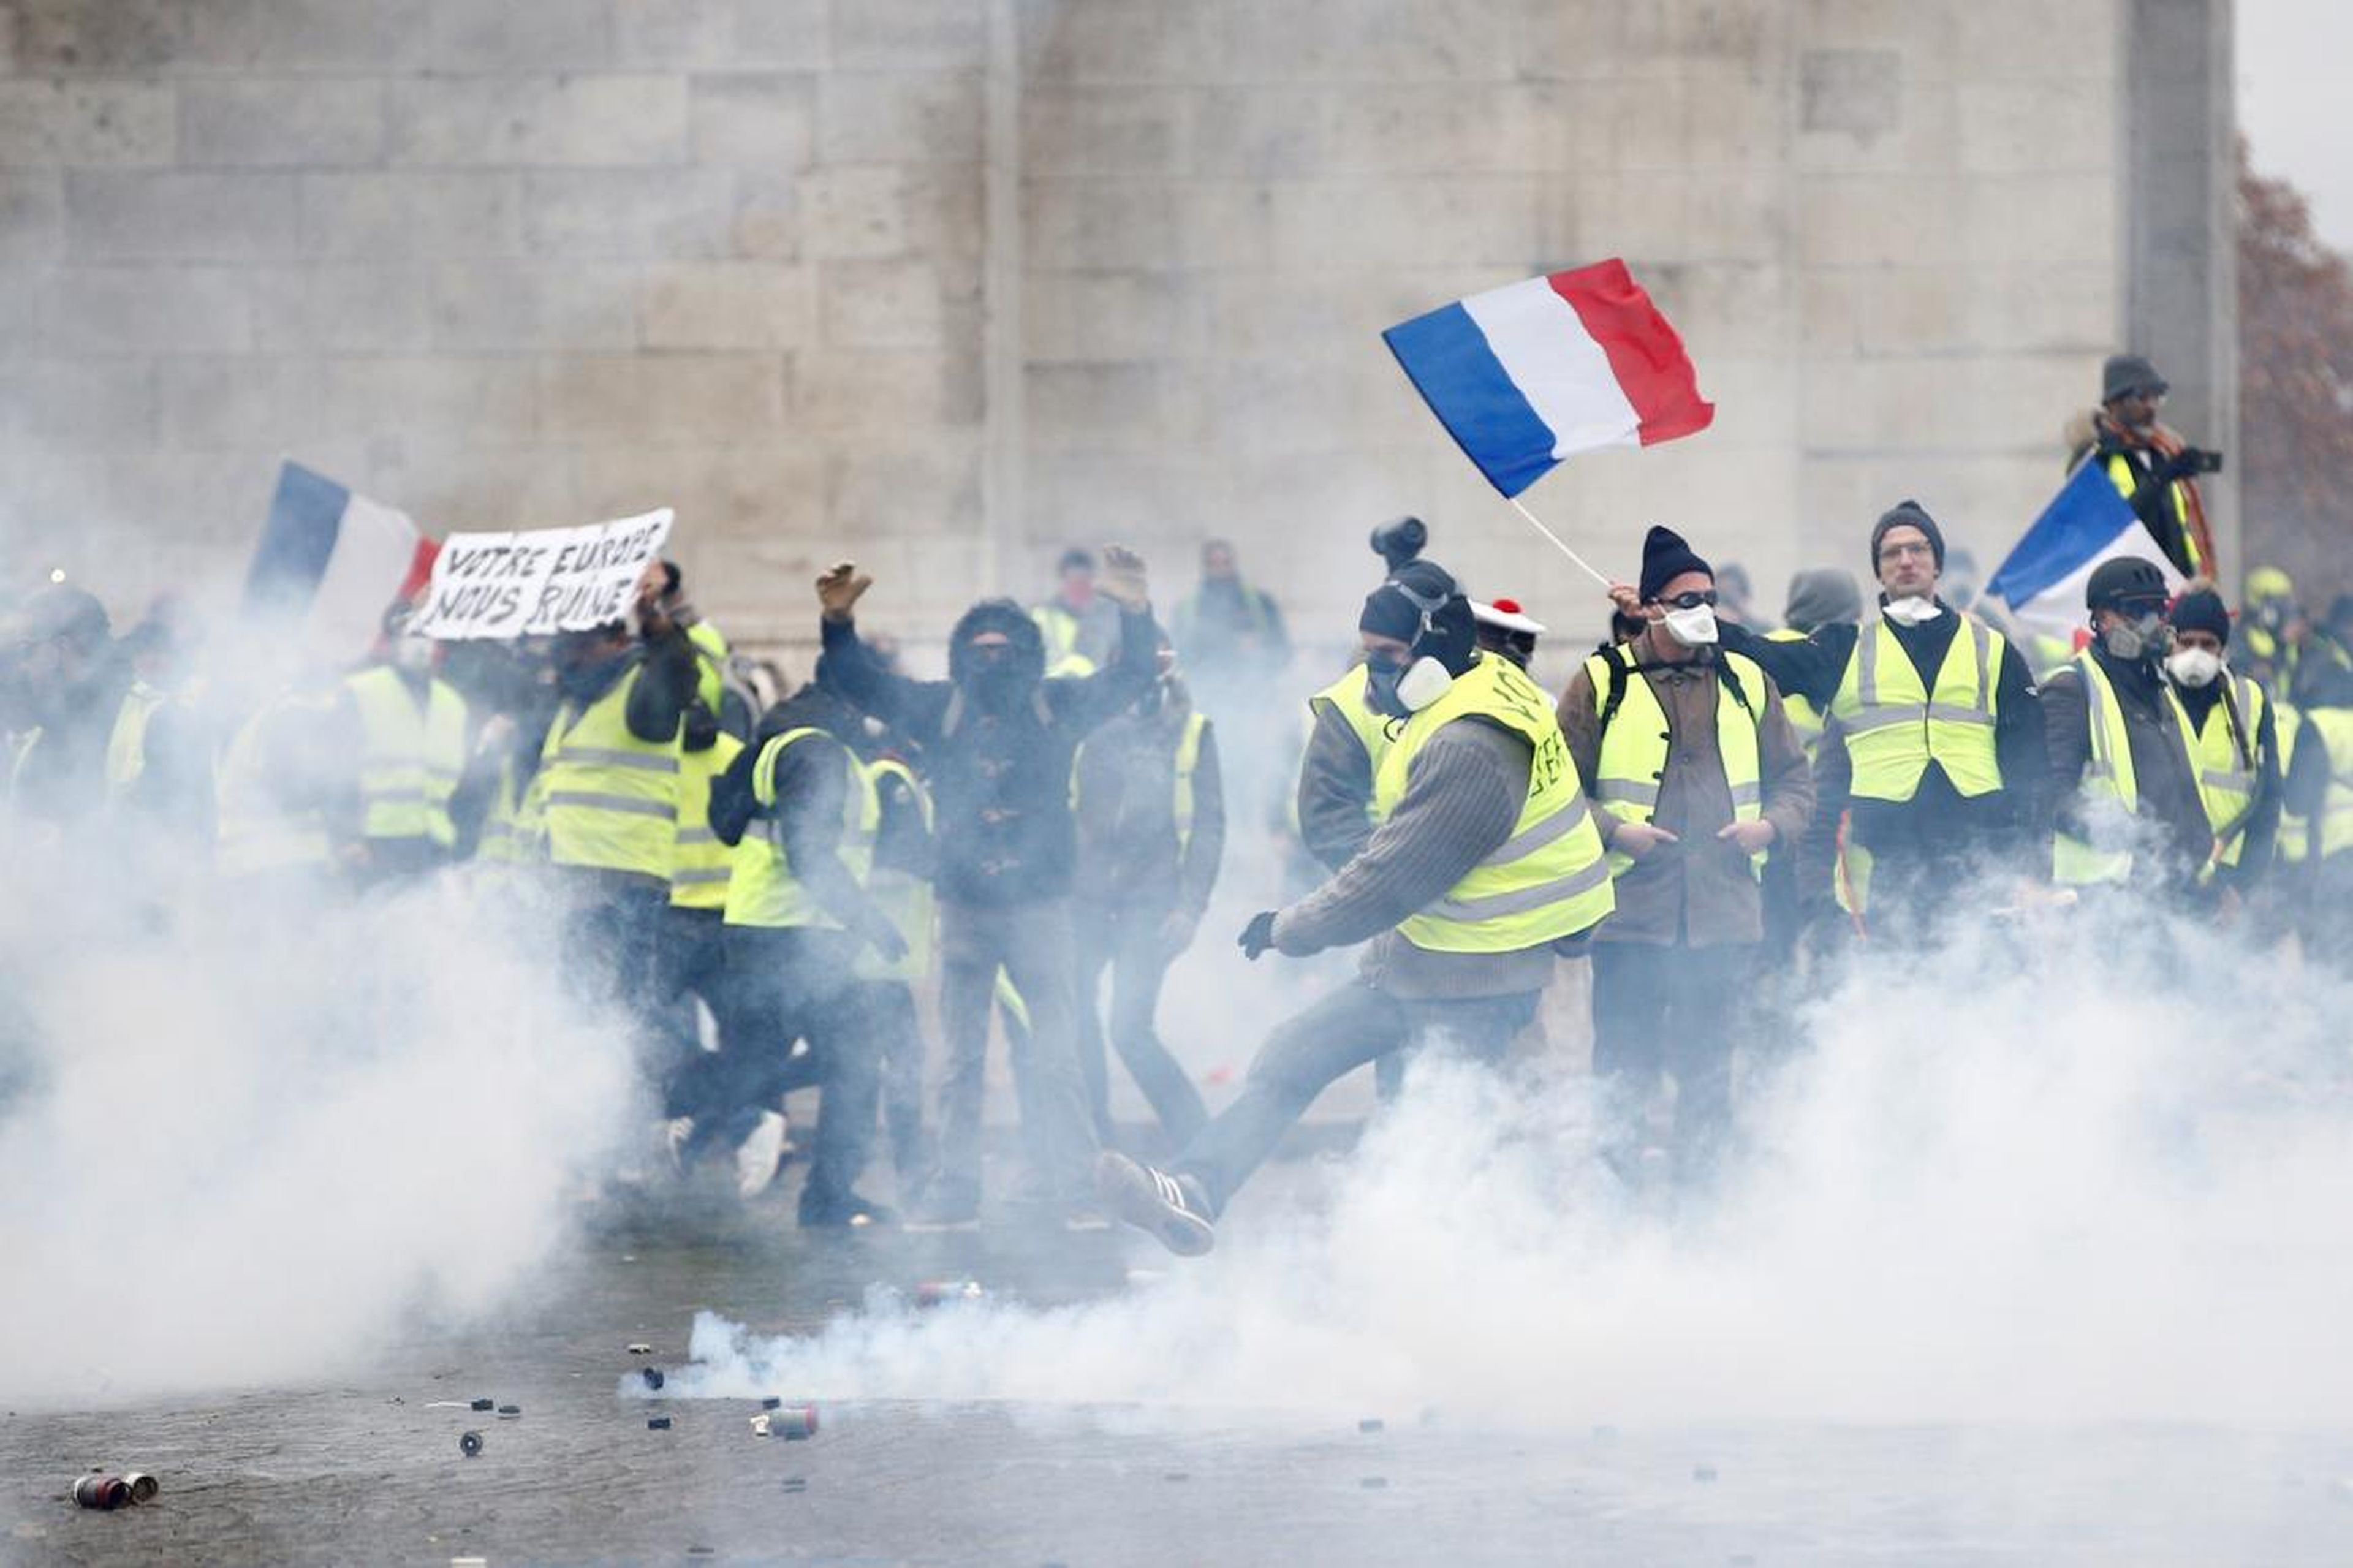 Protesters wearing yellow vests, a symbol of a French drivers' protest against higher diesel taxes, face off with French riot police during clashes at the Place de l'Etoile near the Arc de Triomphe in Paris, France, December 1, 2018.